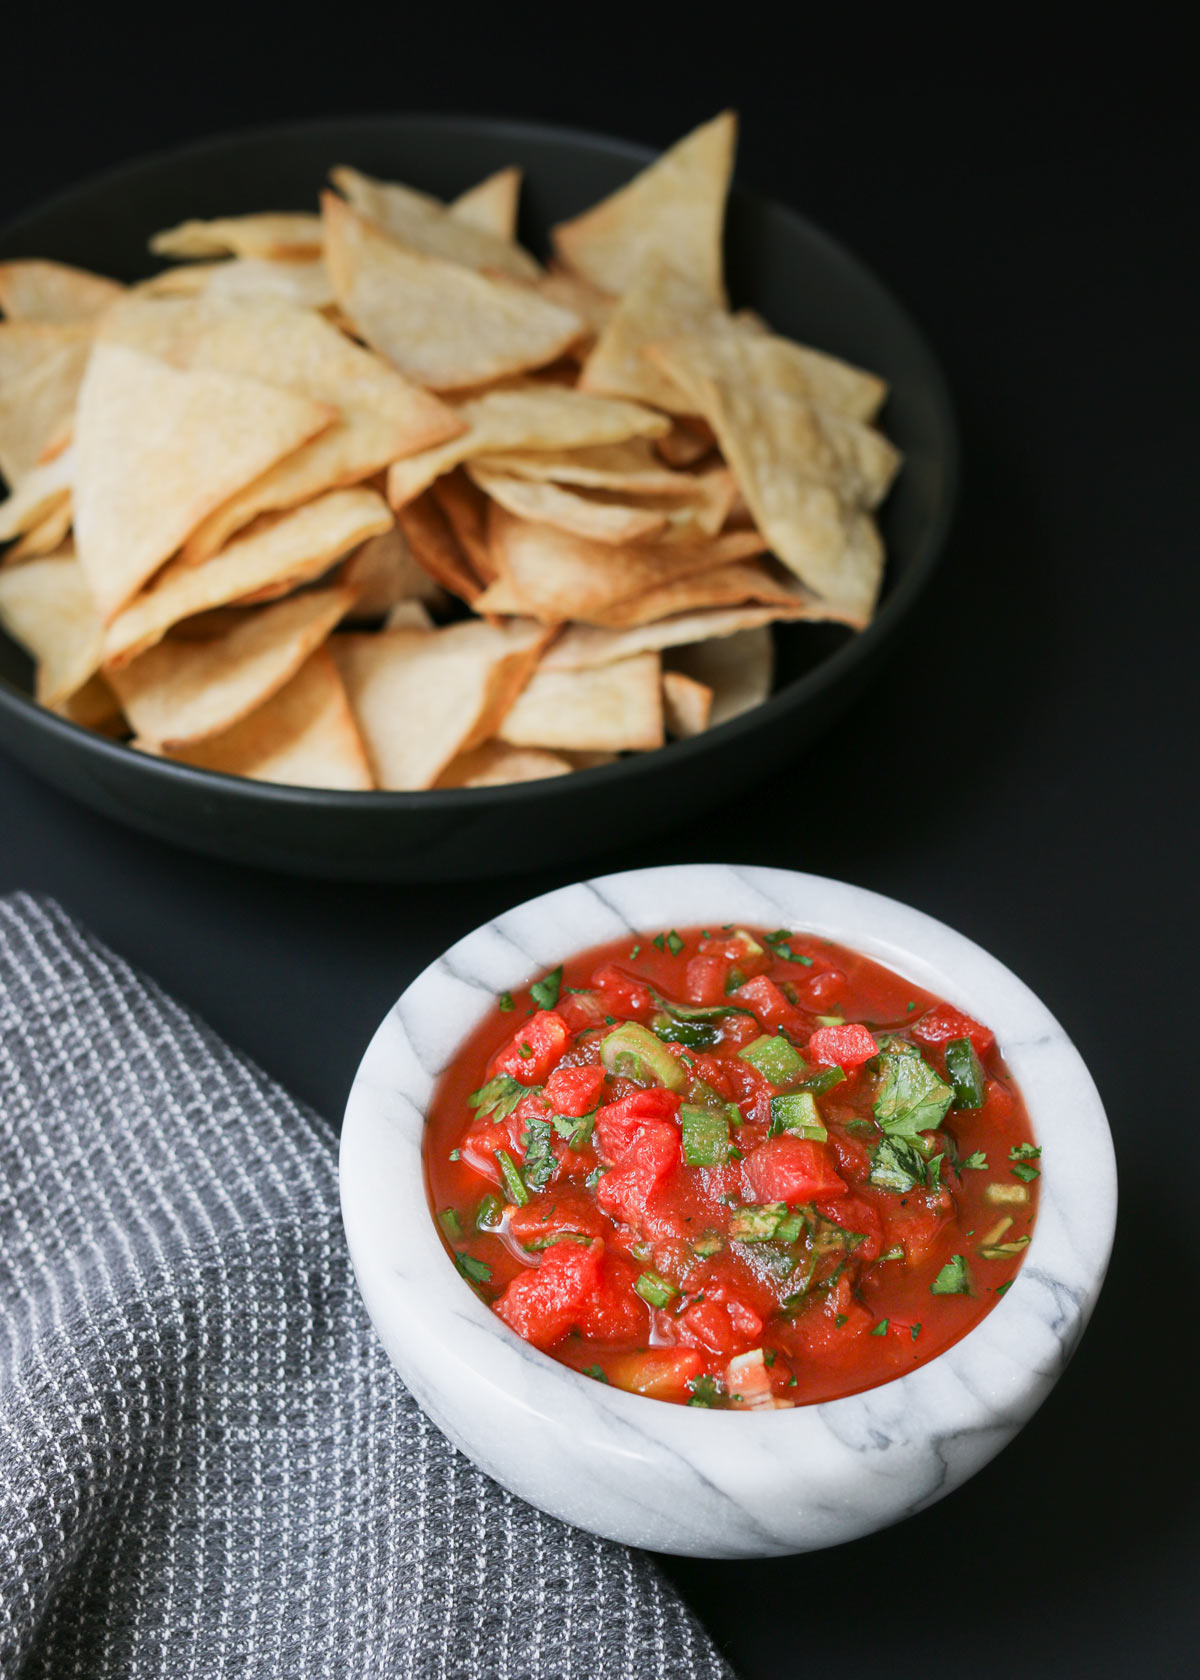 salsa in a marble bowl on a black table next to a gray cloth and a black bowl of tortilla chips.